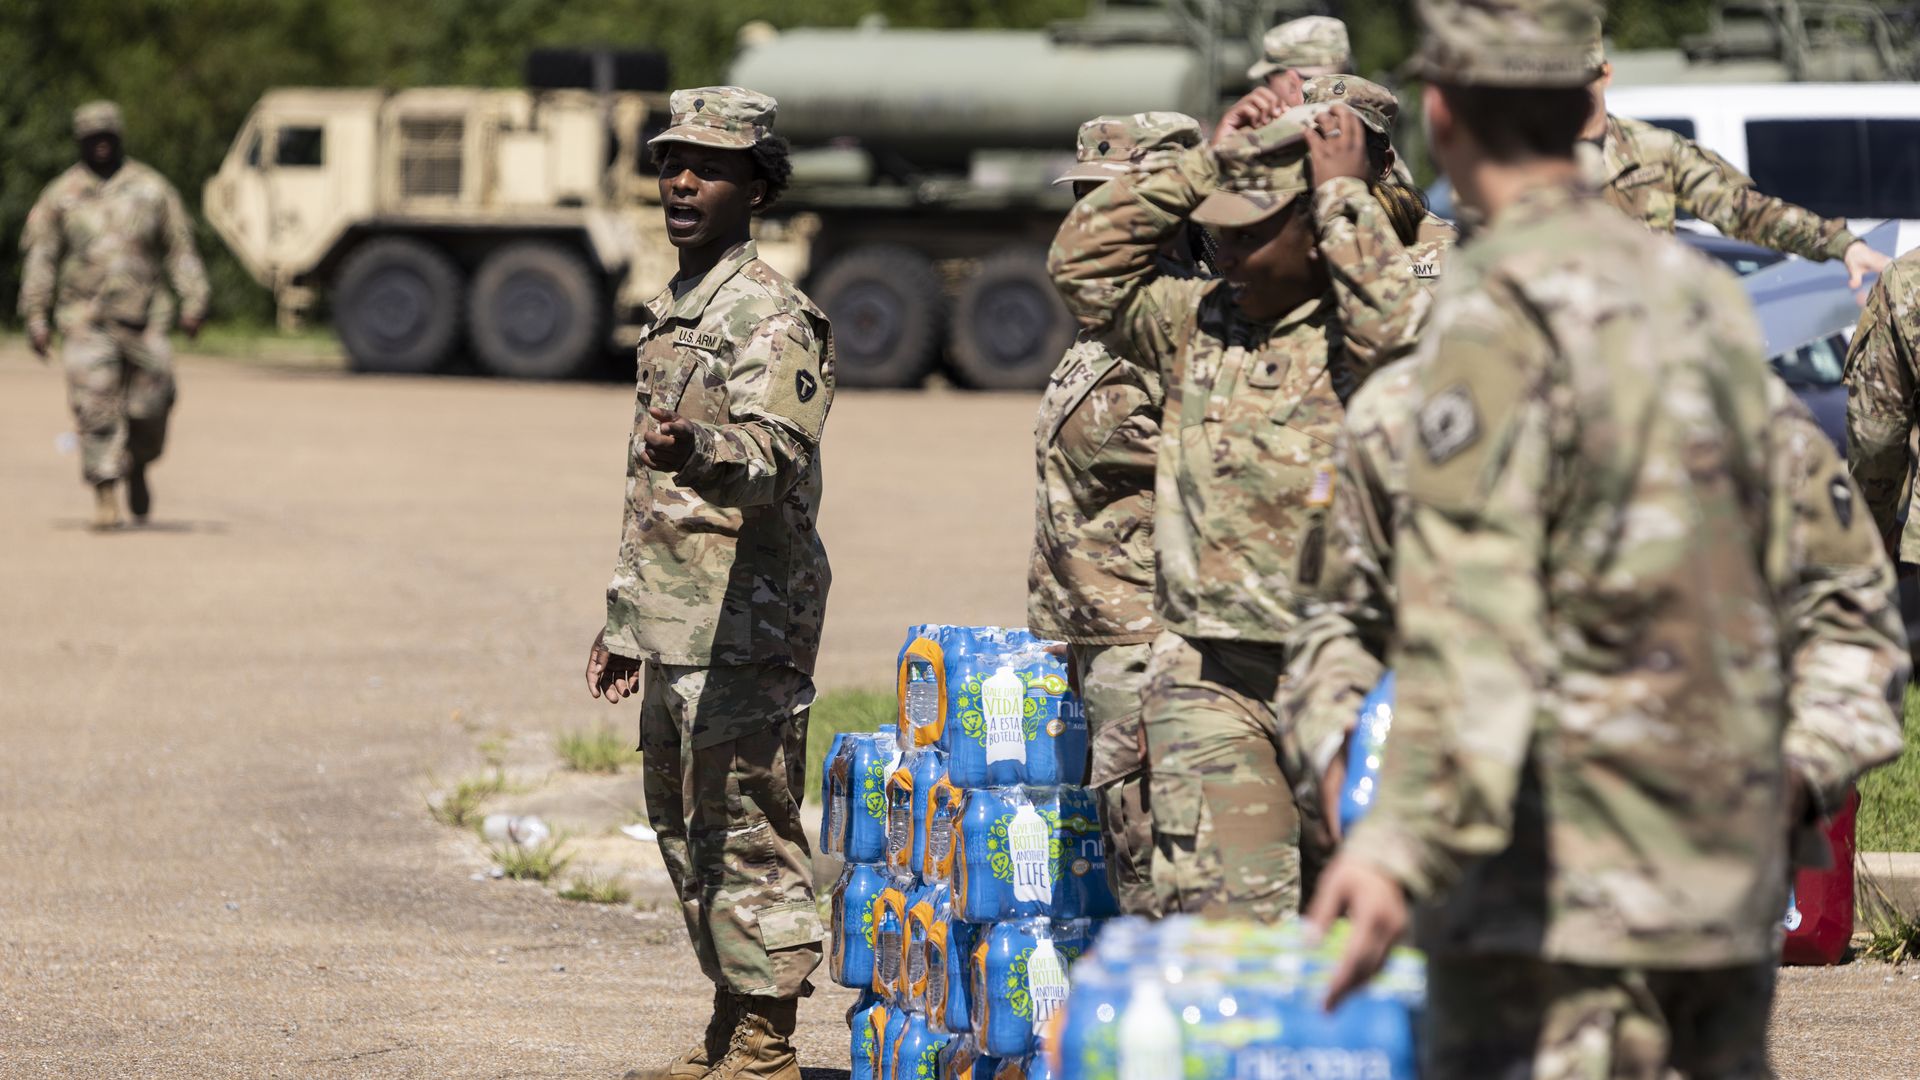 embers of the Mississippi National Guard hand out bottled water at Thomas Cardozo Middle School in response to the water crisis on September 01, 2022